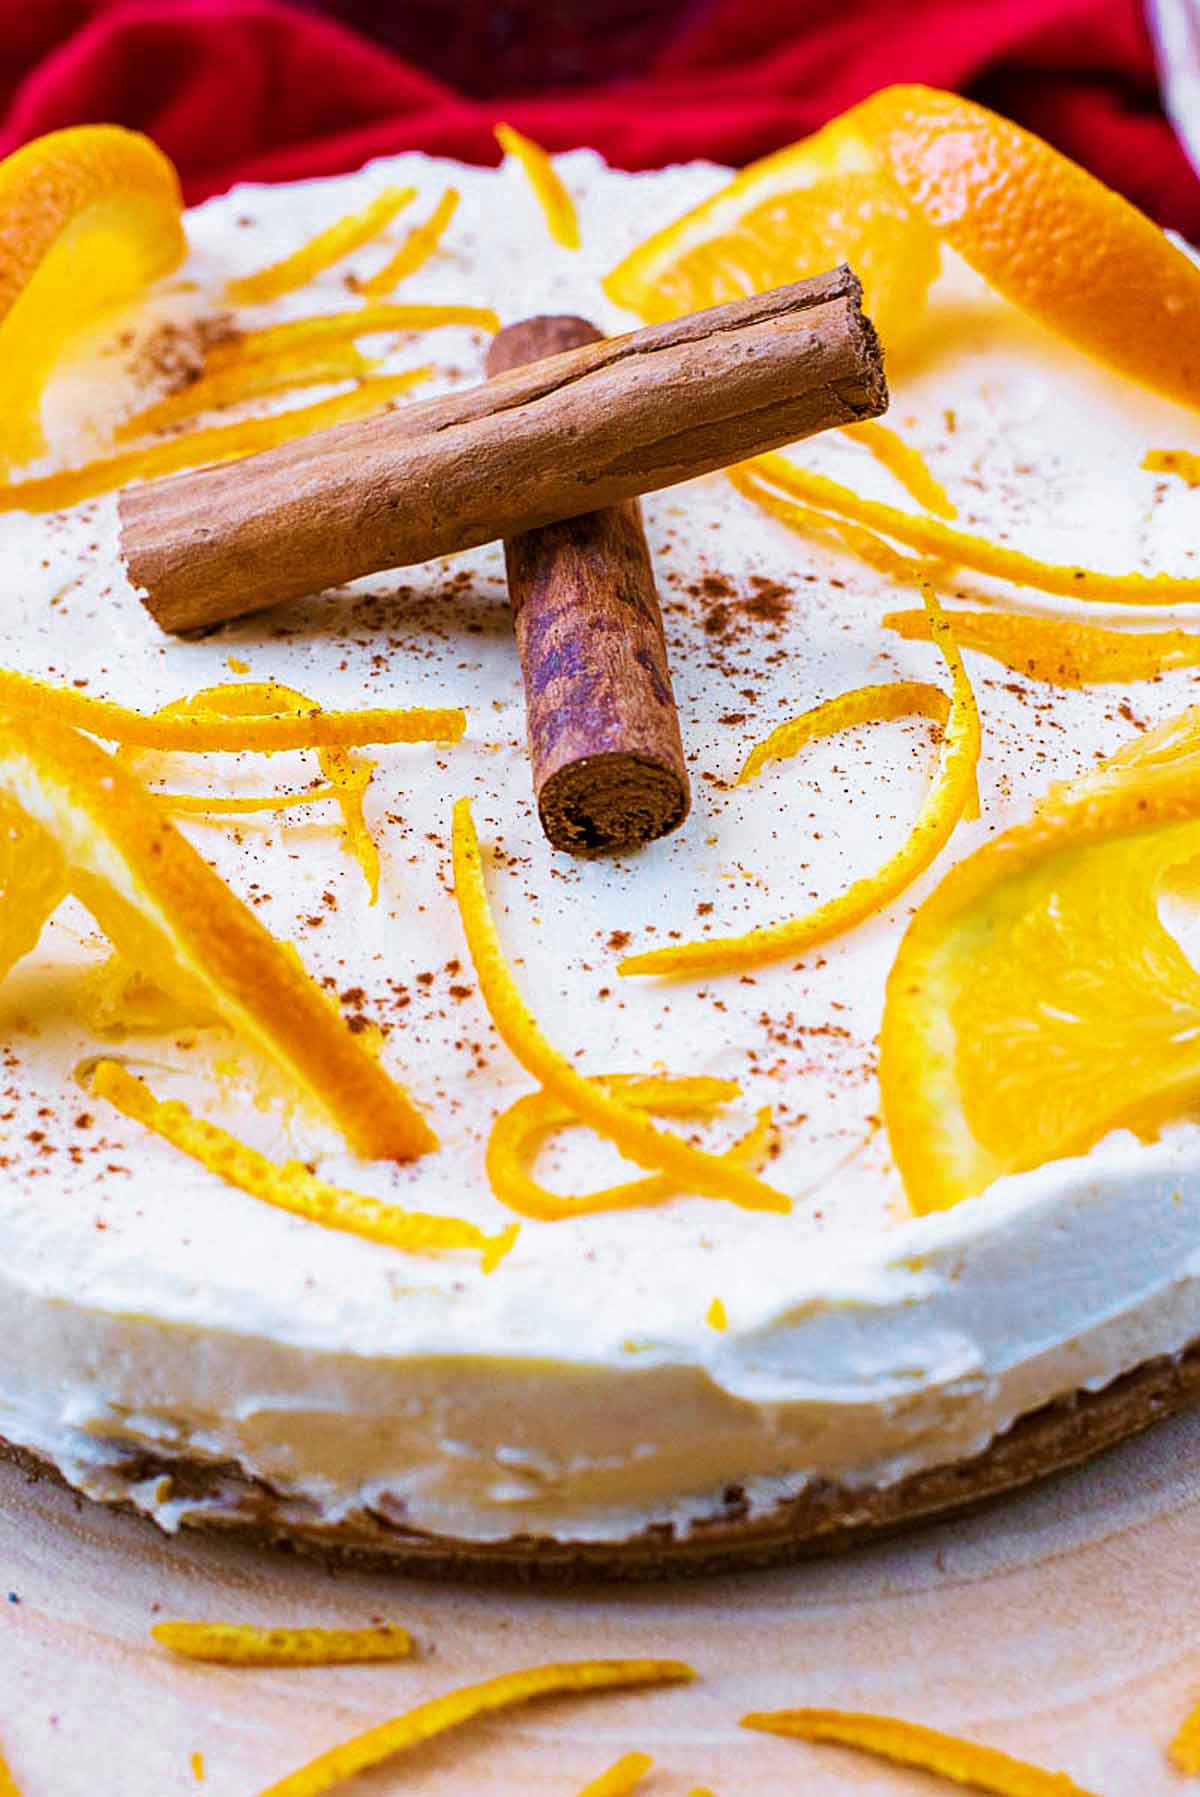 A cheesecake with orange slices, orange peel and two cinnamon sticks on top.